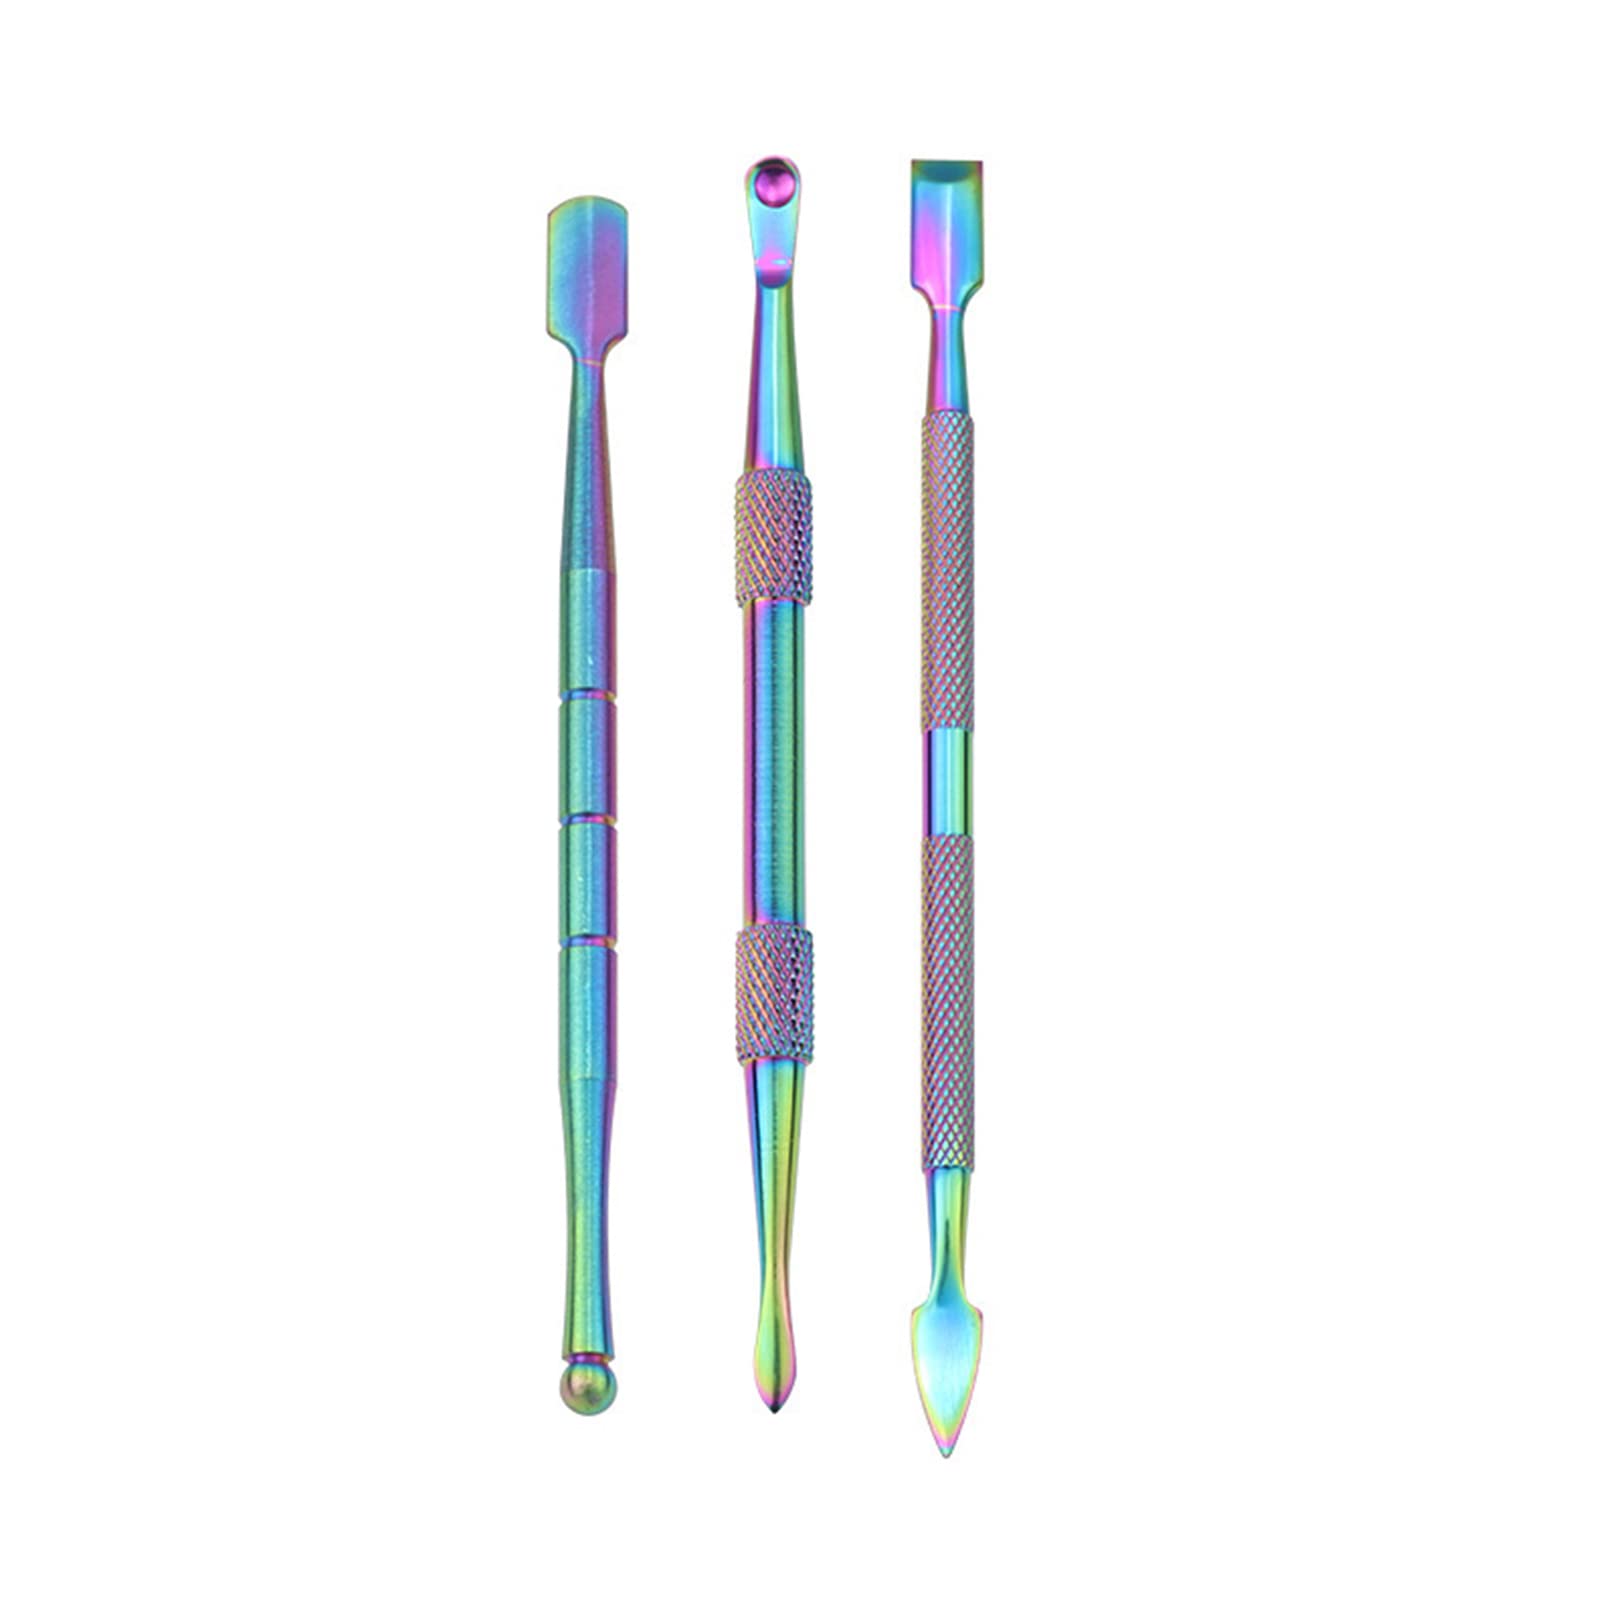 BLMHTWO 3 Pieces Wax Carving Tools, Rainbow Sculpting Tools DAB